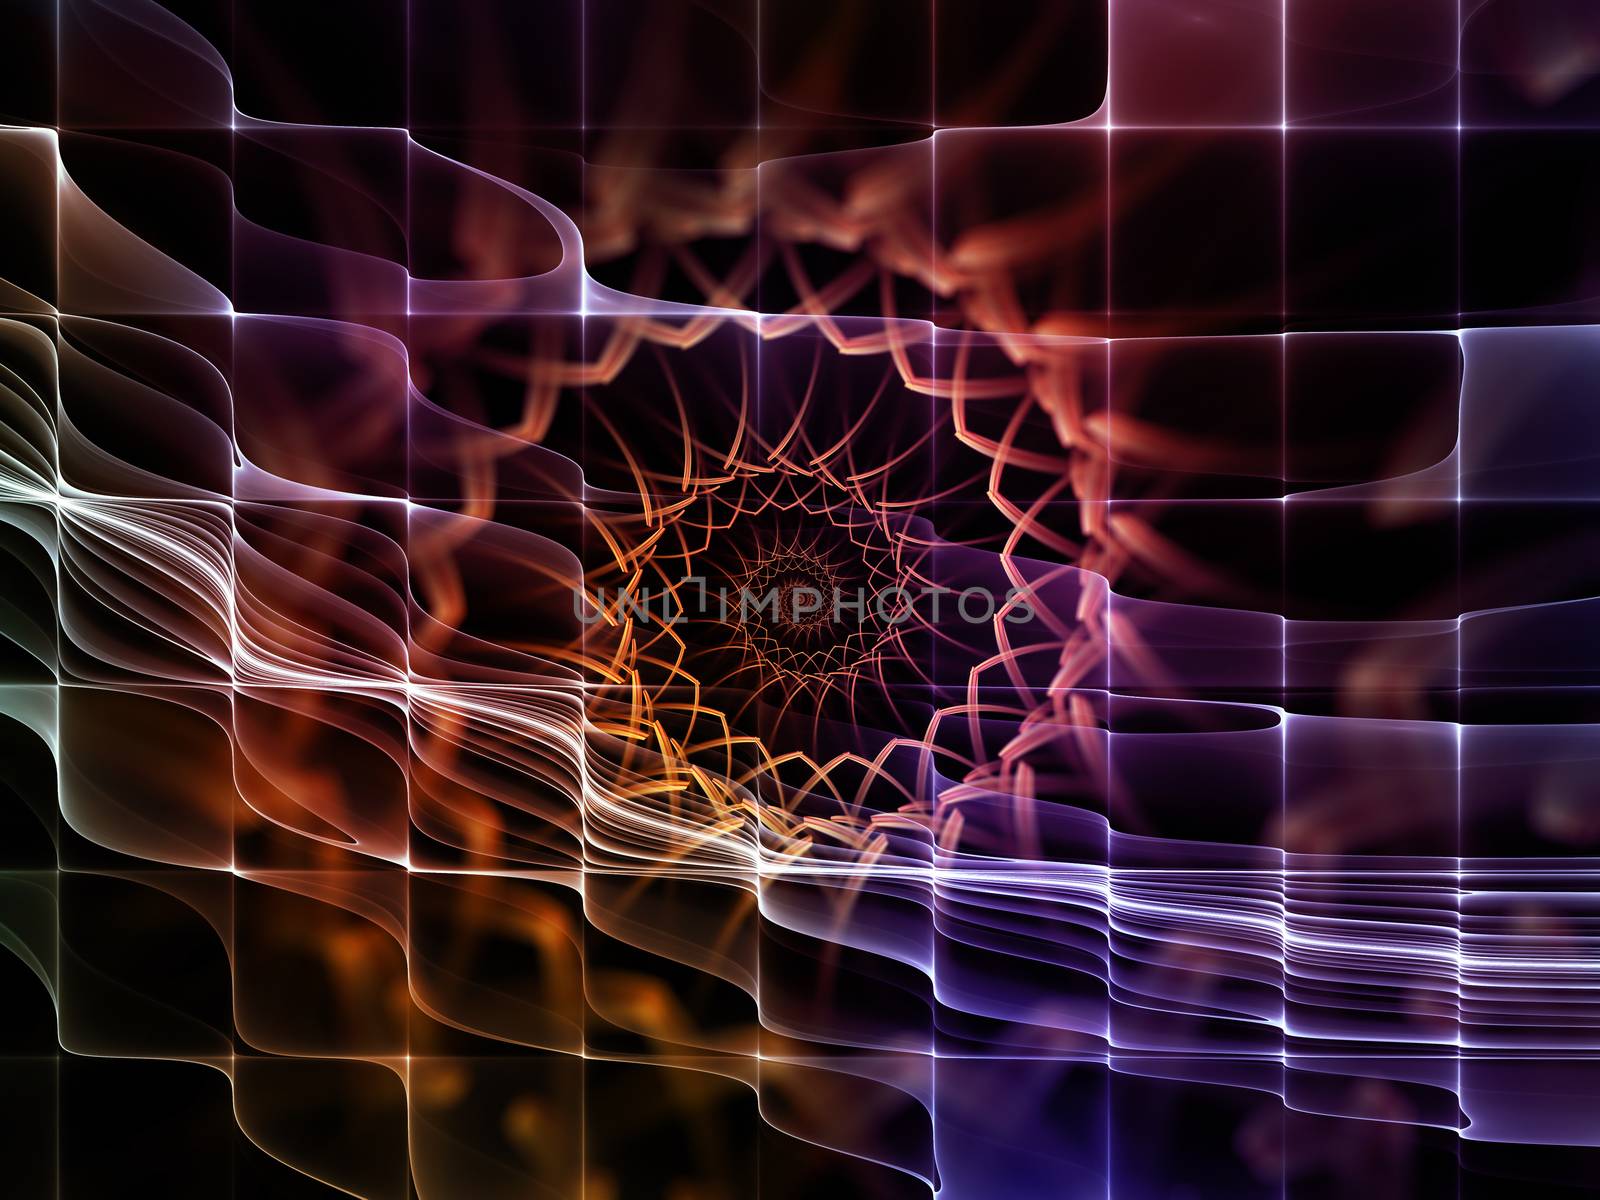 Geometry of Space series. Abstract design made of conceptual grids, curves and fractal elements on the subject of physics, mathematics, technology, science and education